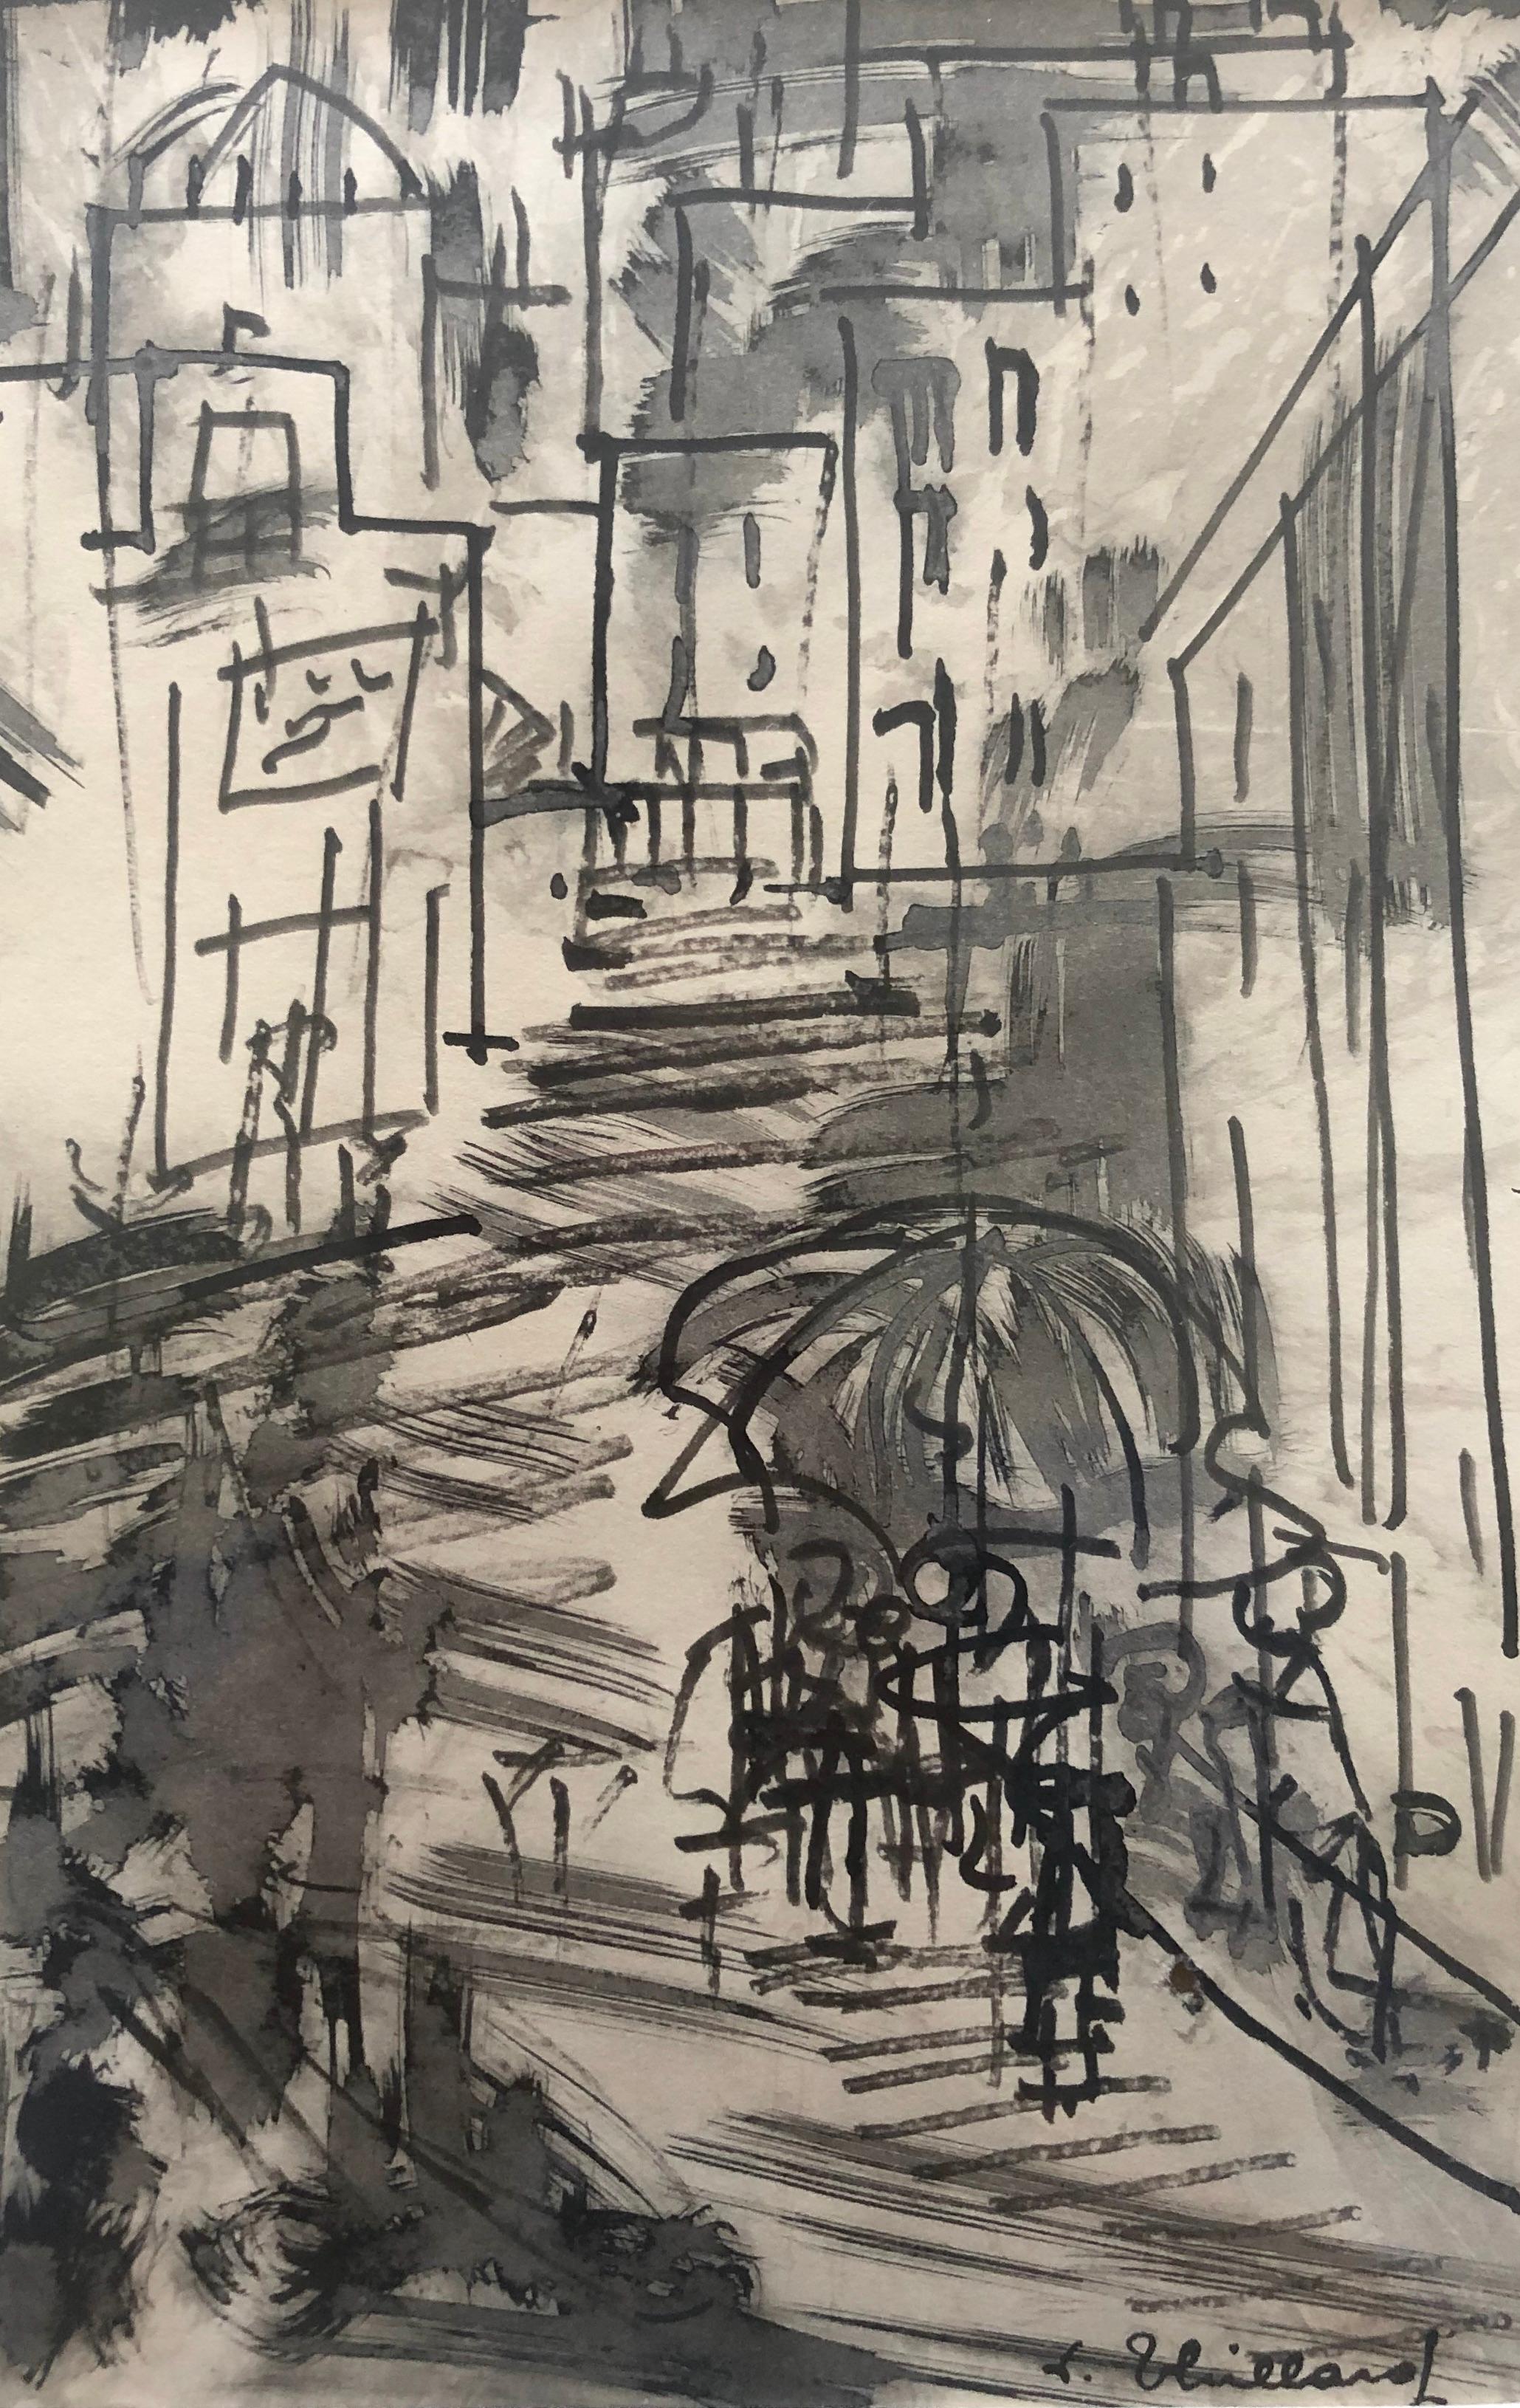 Unknown Landscape Art - Animated Street, Mixed Technique Early Twentieth, Signature To Identify